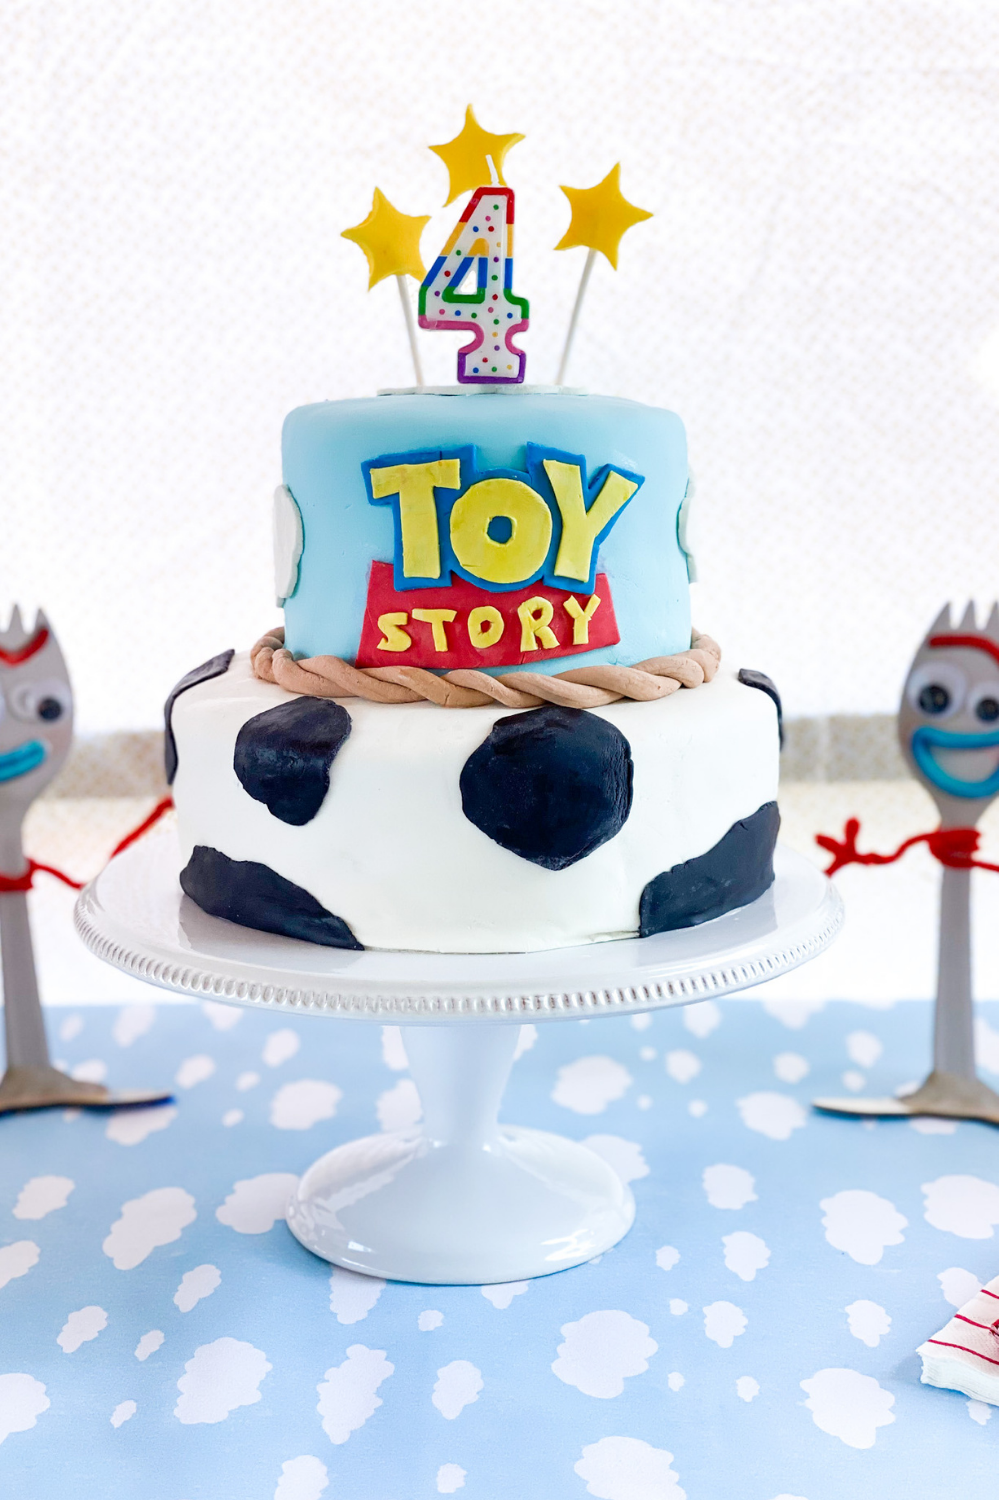 Toy Story Cake – Baked by Bri